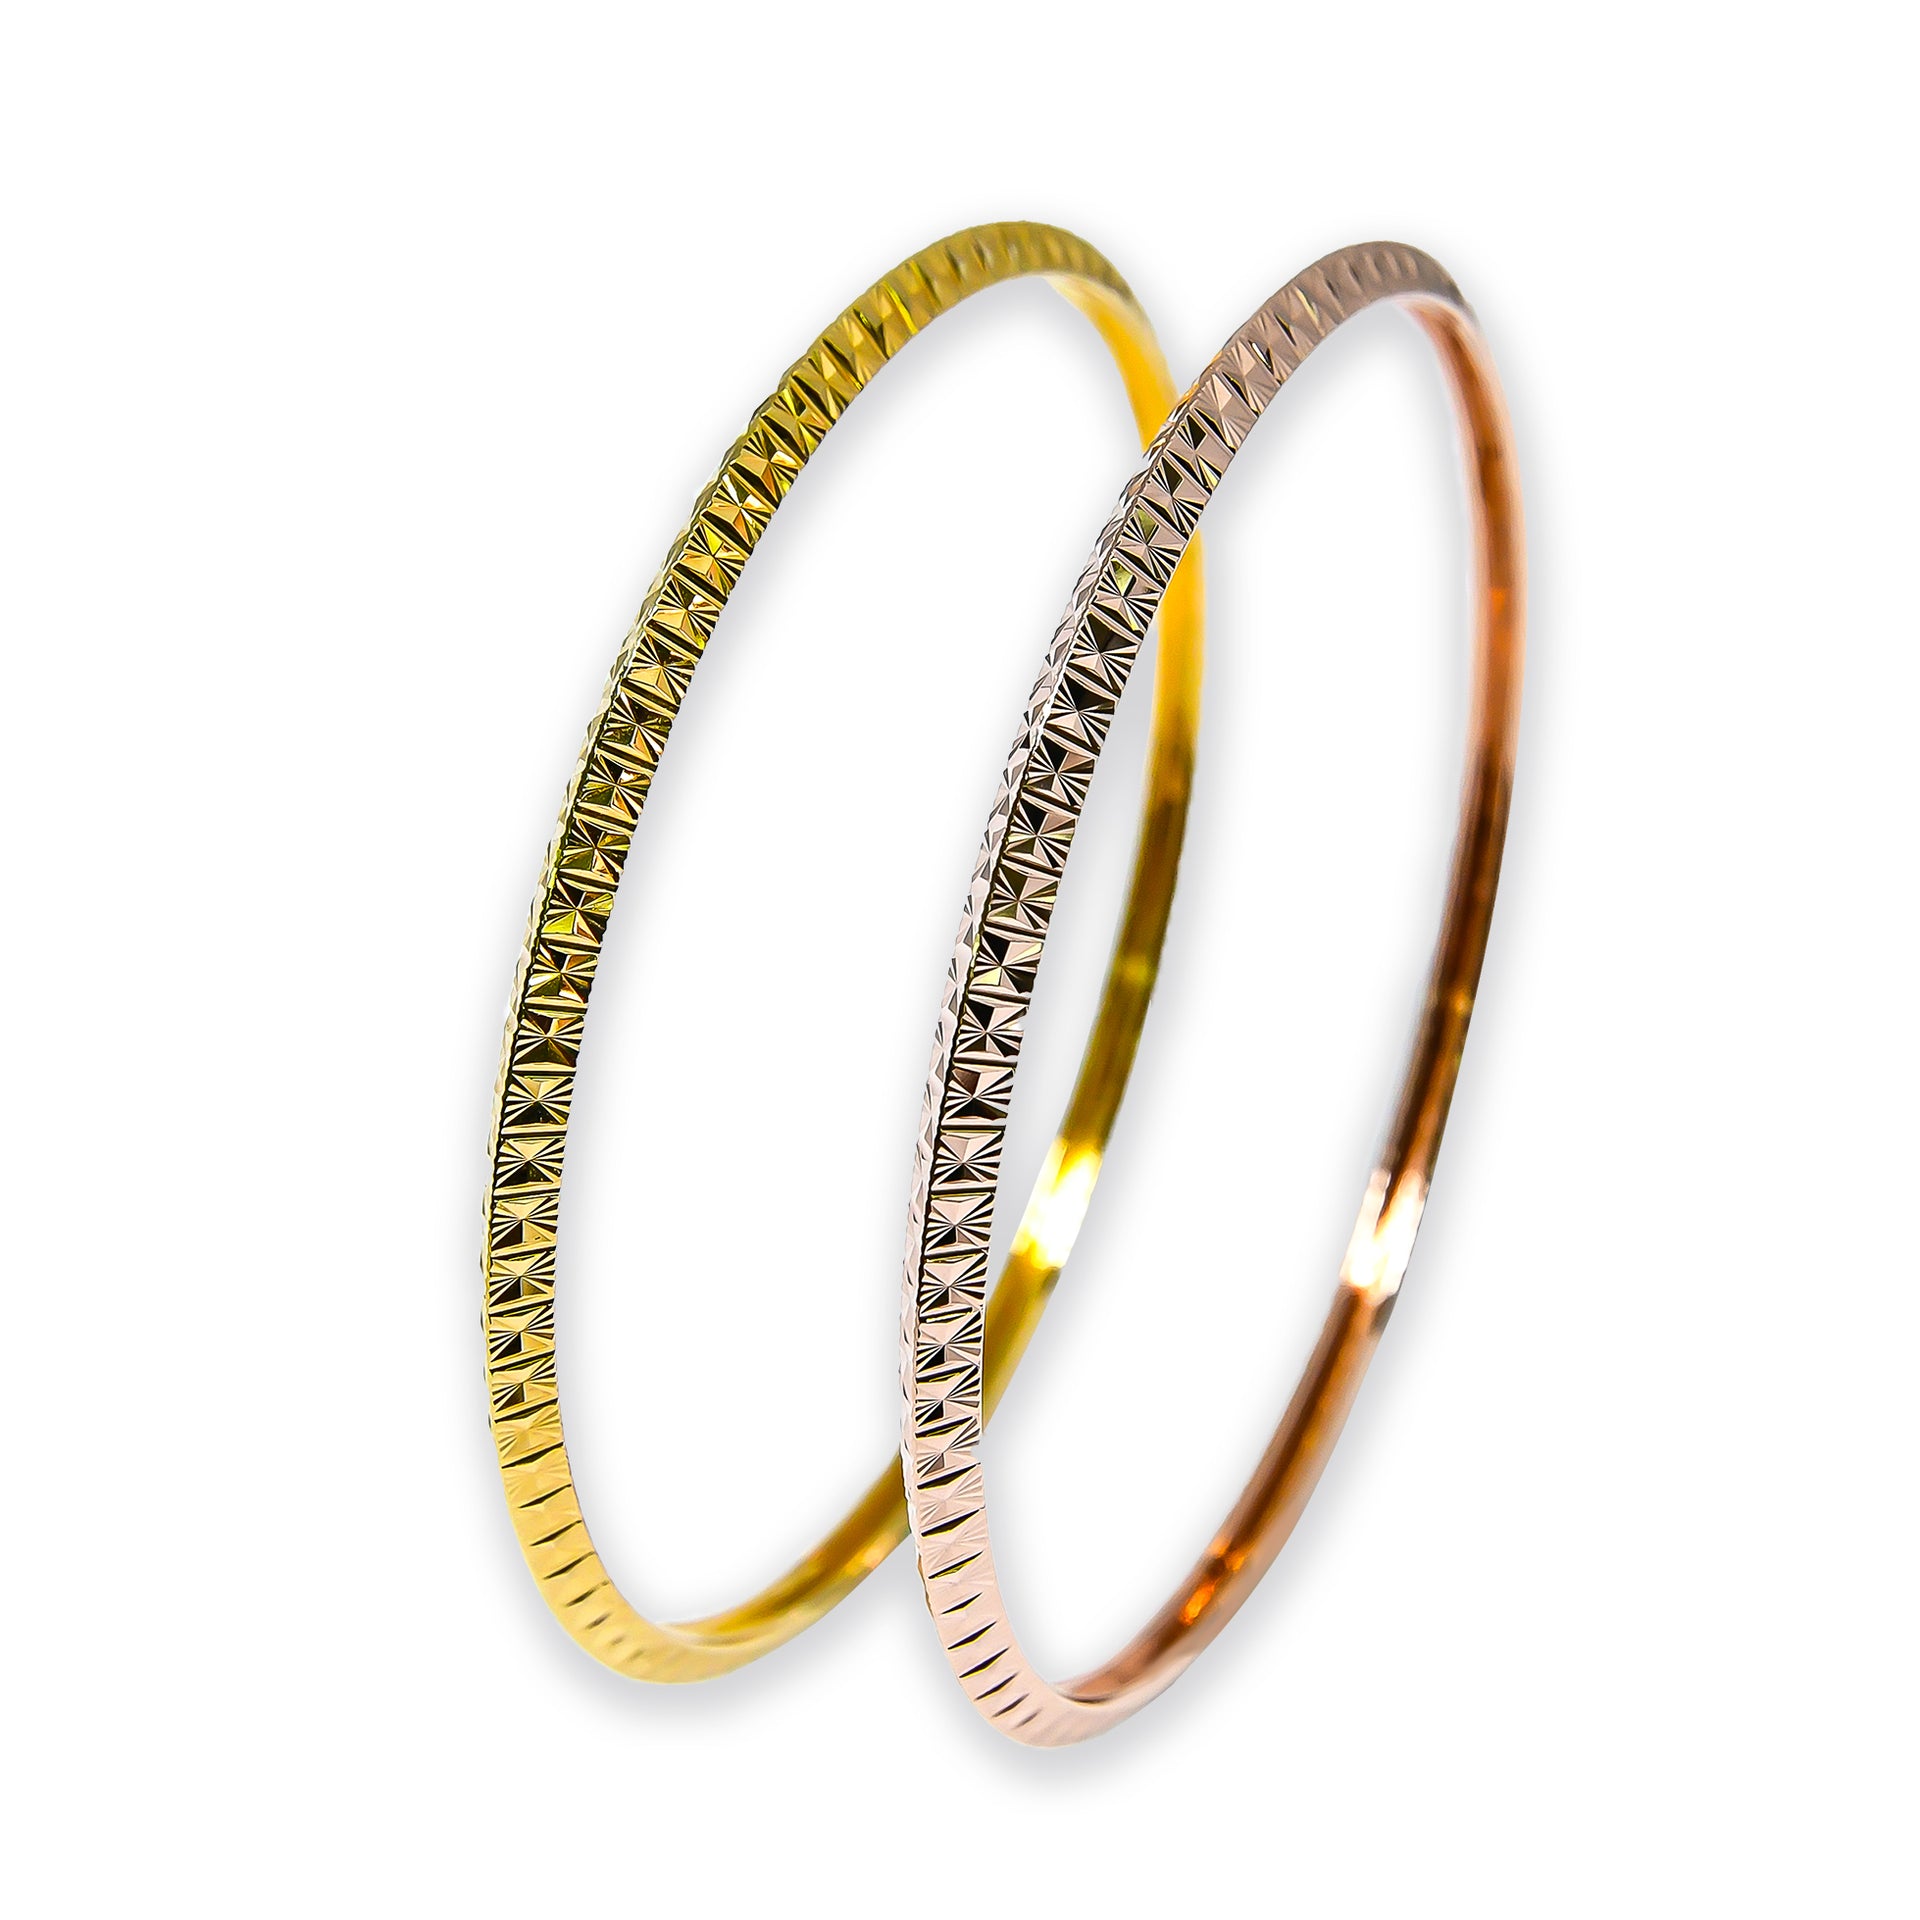 Bangle EARTH IS ROUND 3mm with triangle profile design yellow gold 18k 750